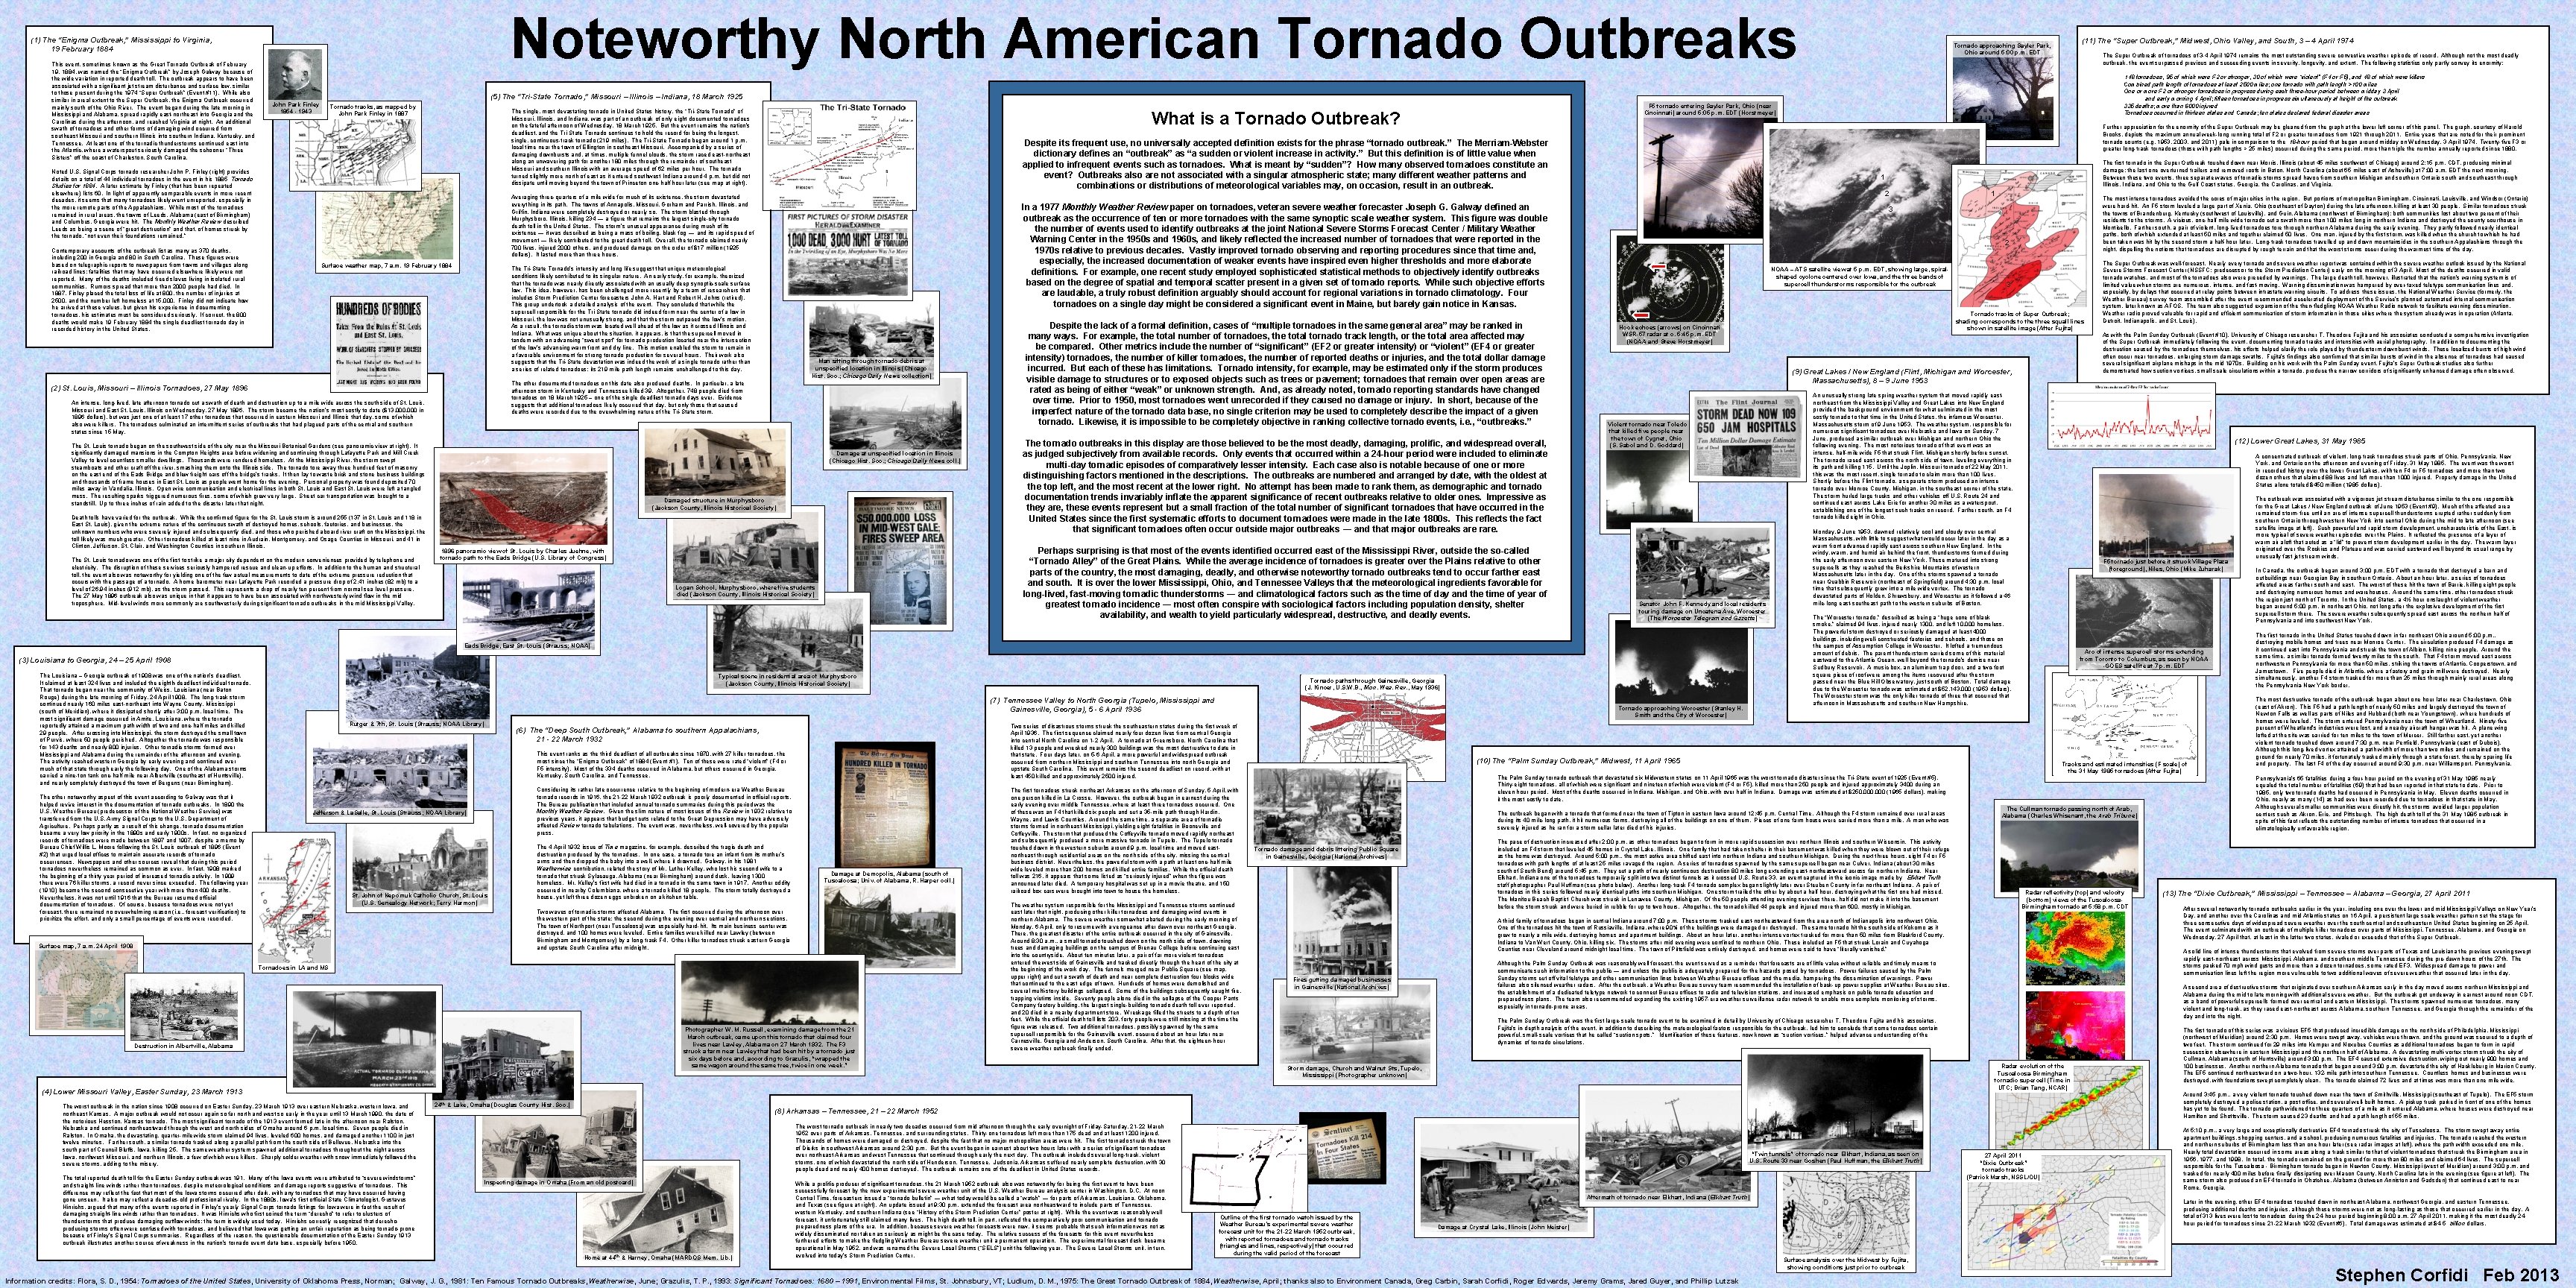 Noteworthy North American Tornado Outbreaks (1) The “Enigma Outbreak, ” Mississippi to Virginia, 19